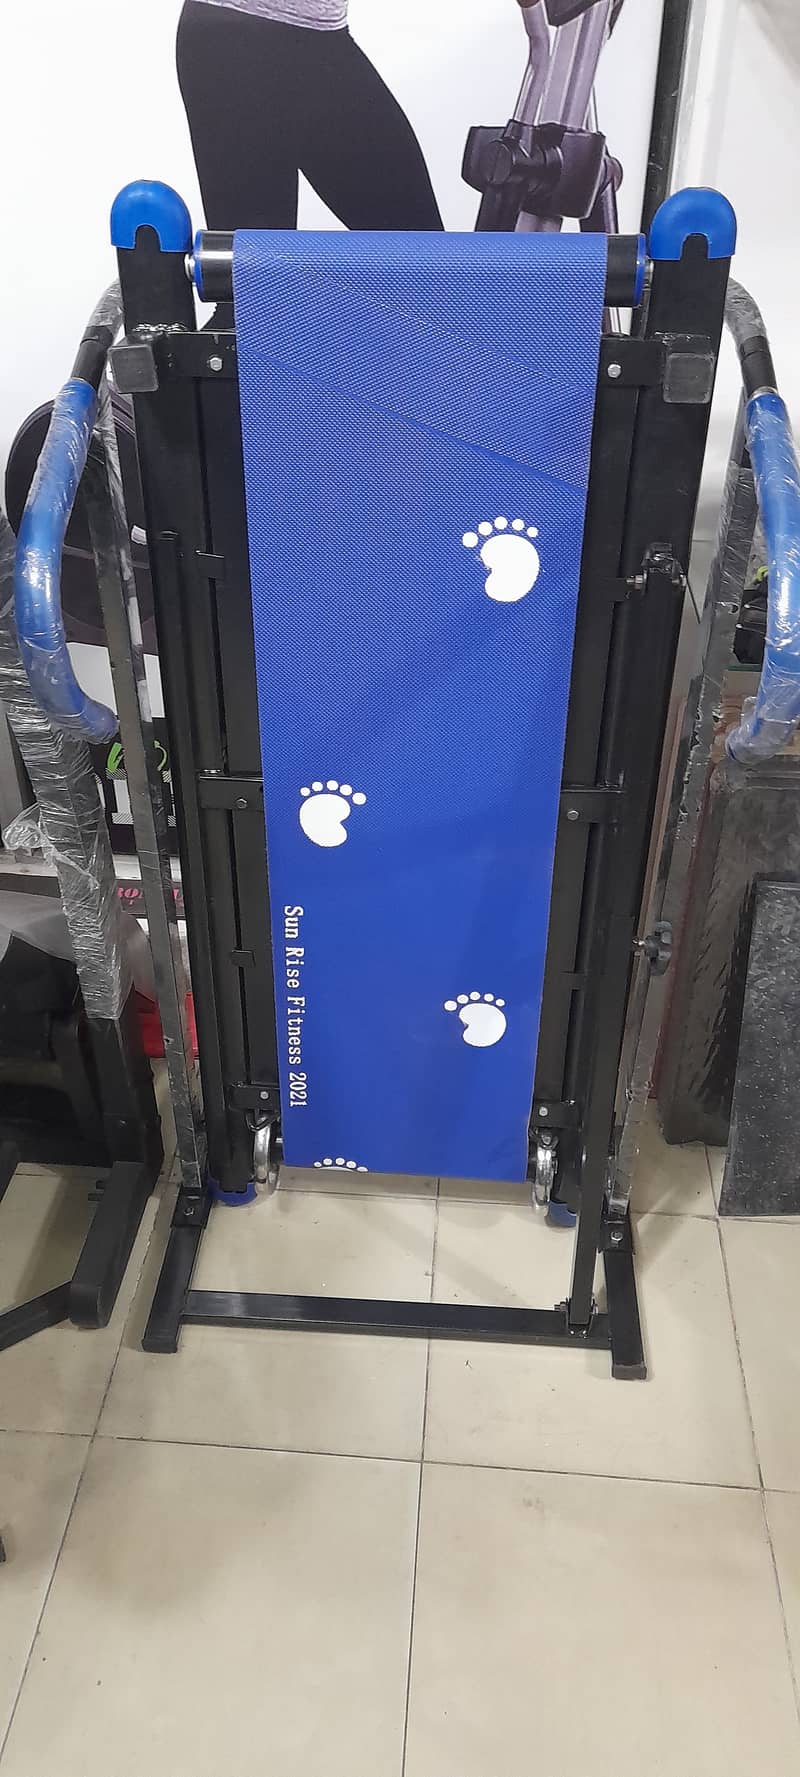 Manual Rollers Treadmill Exercise machine. 03334973737 4